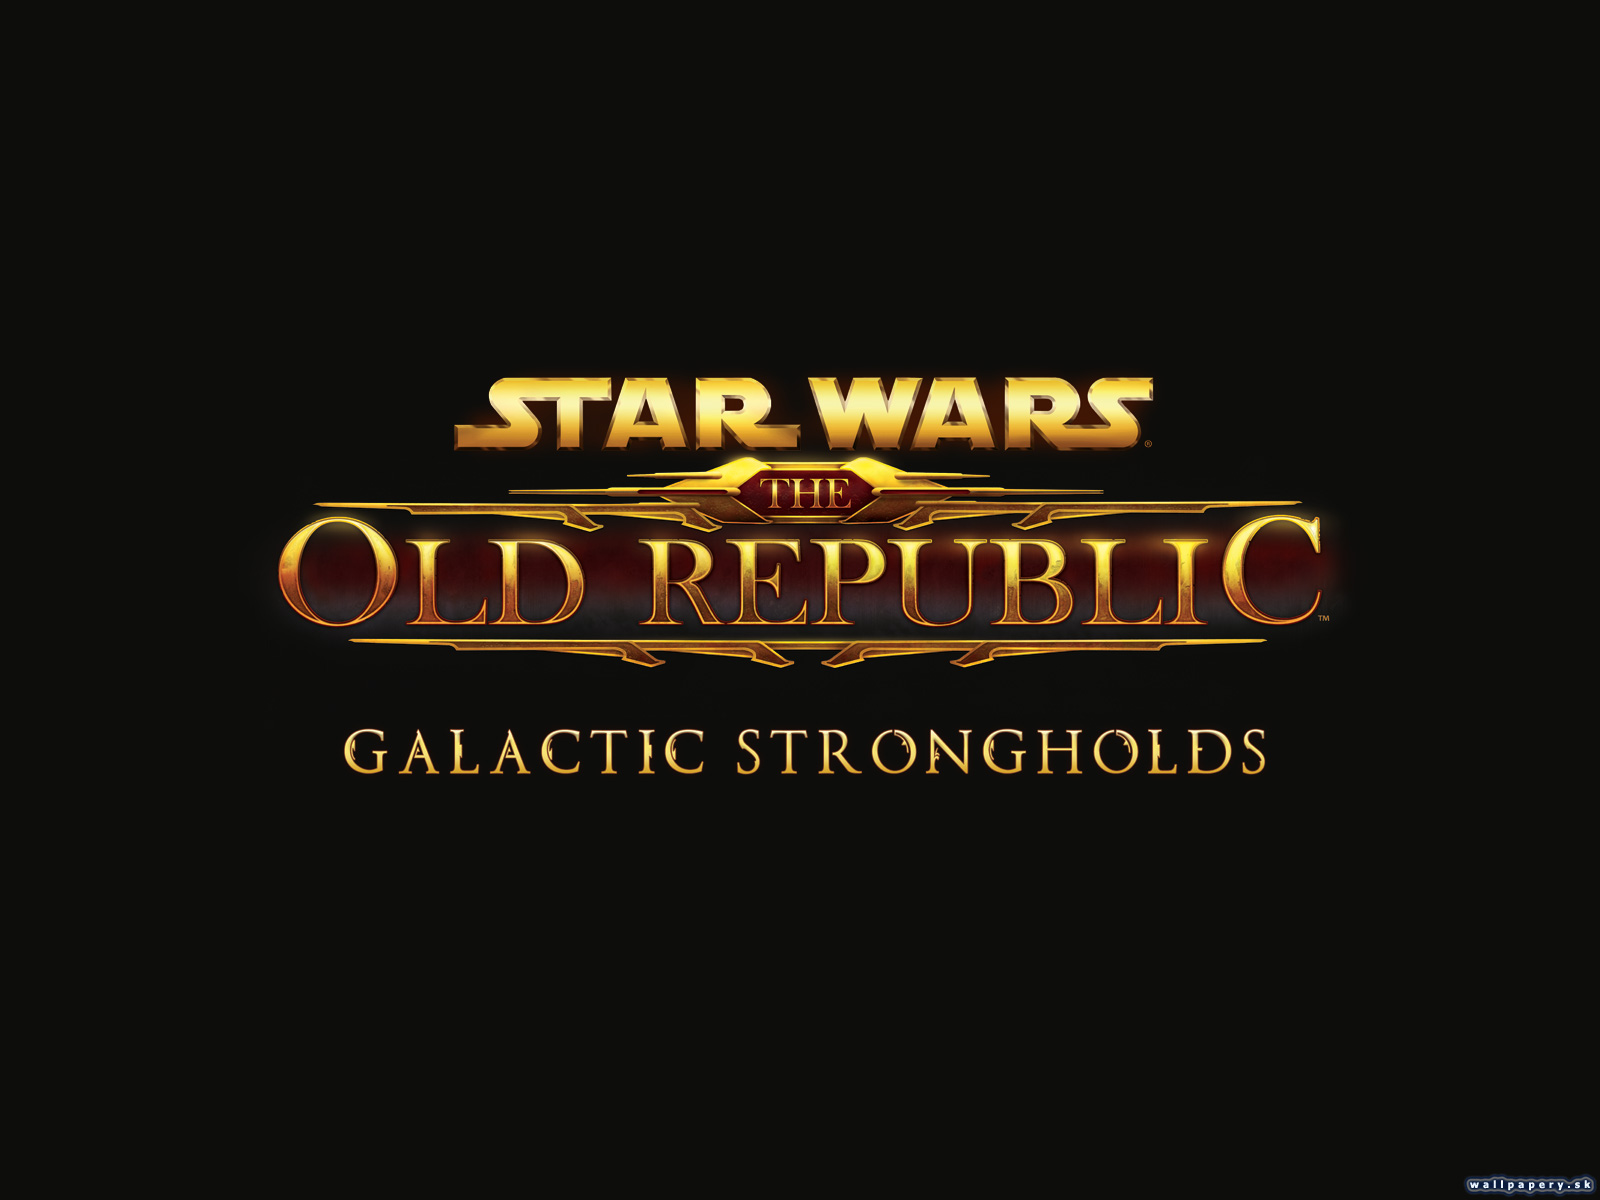 Star Wars: The Old Republic - Galactic Strongholds - wallpaper 2